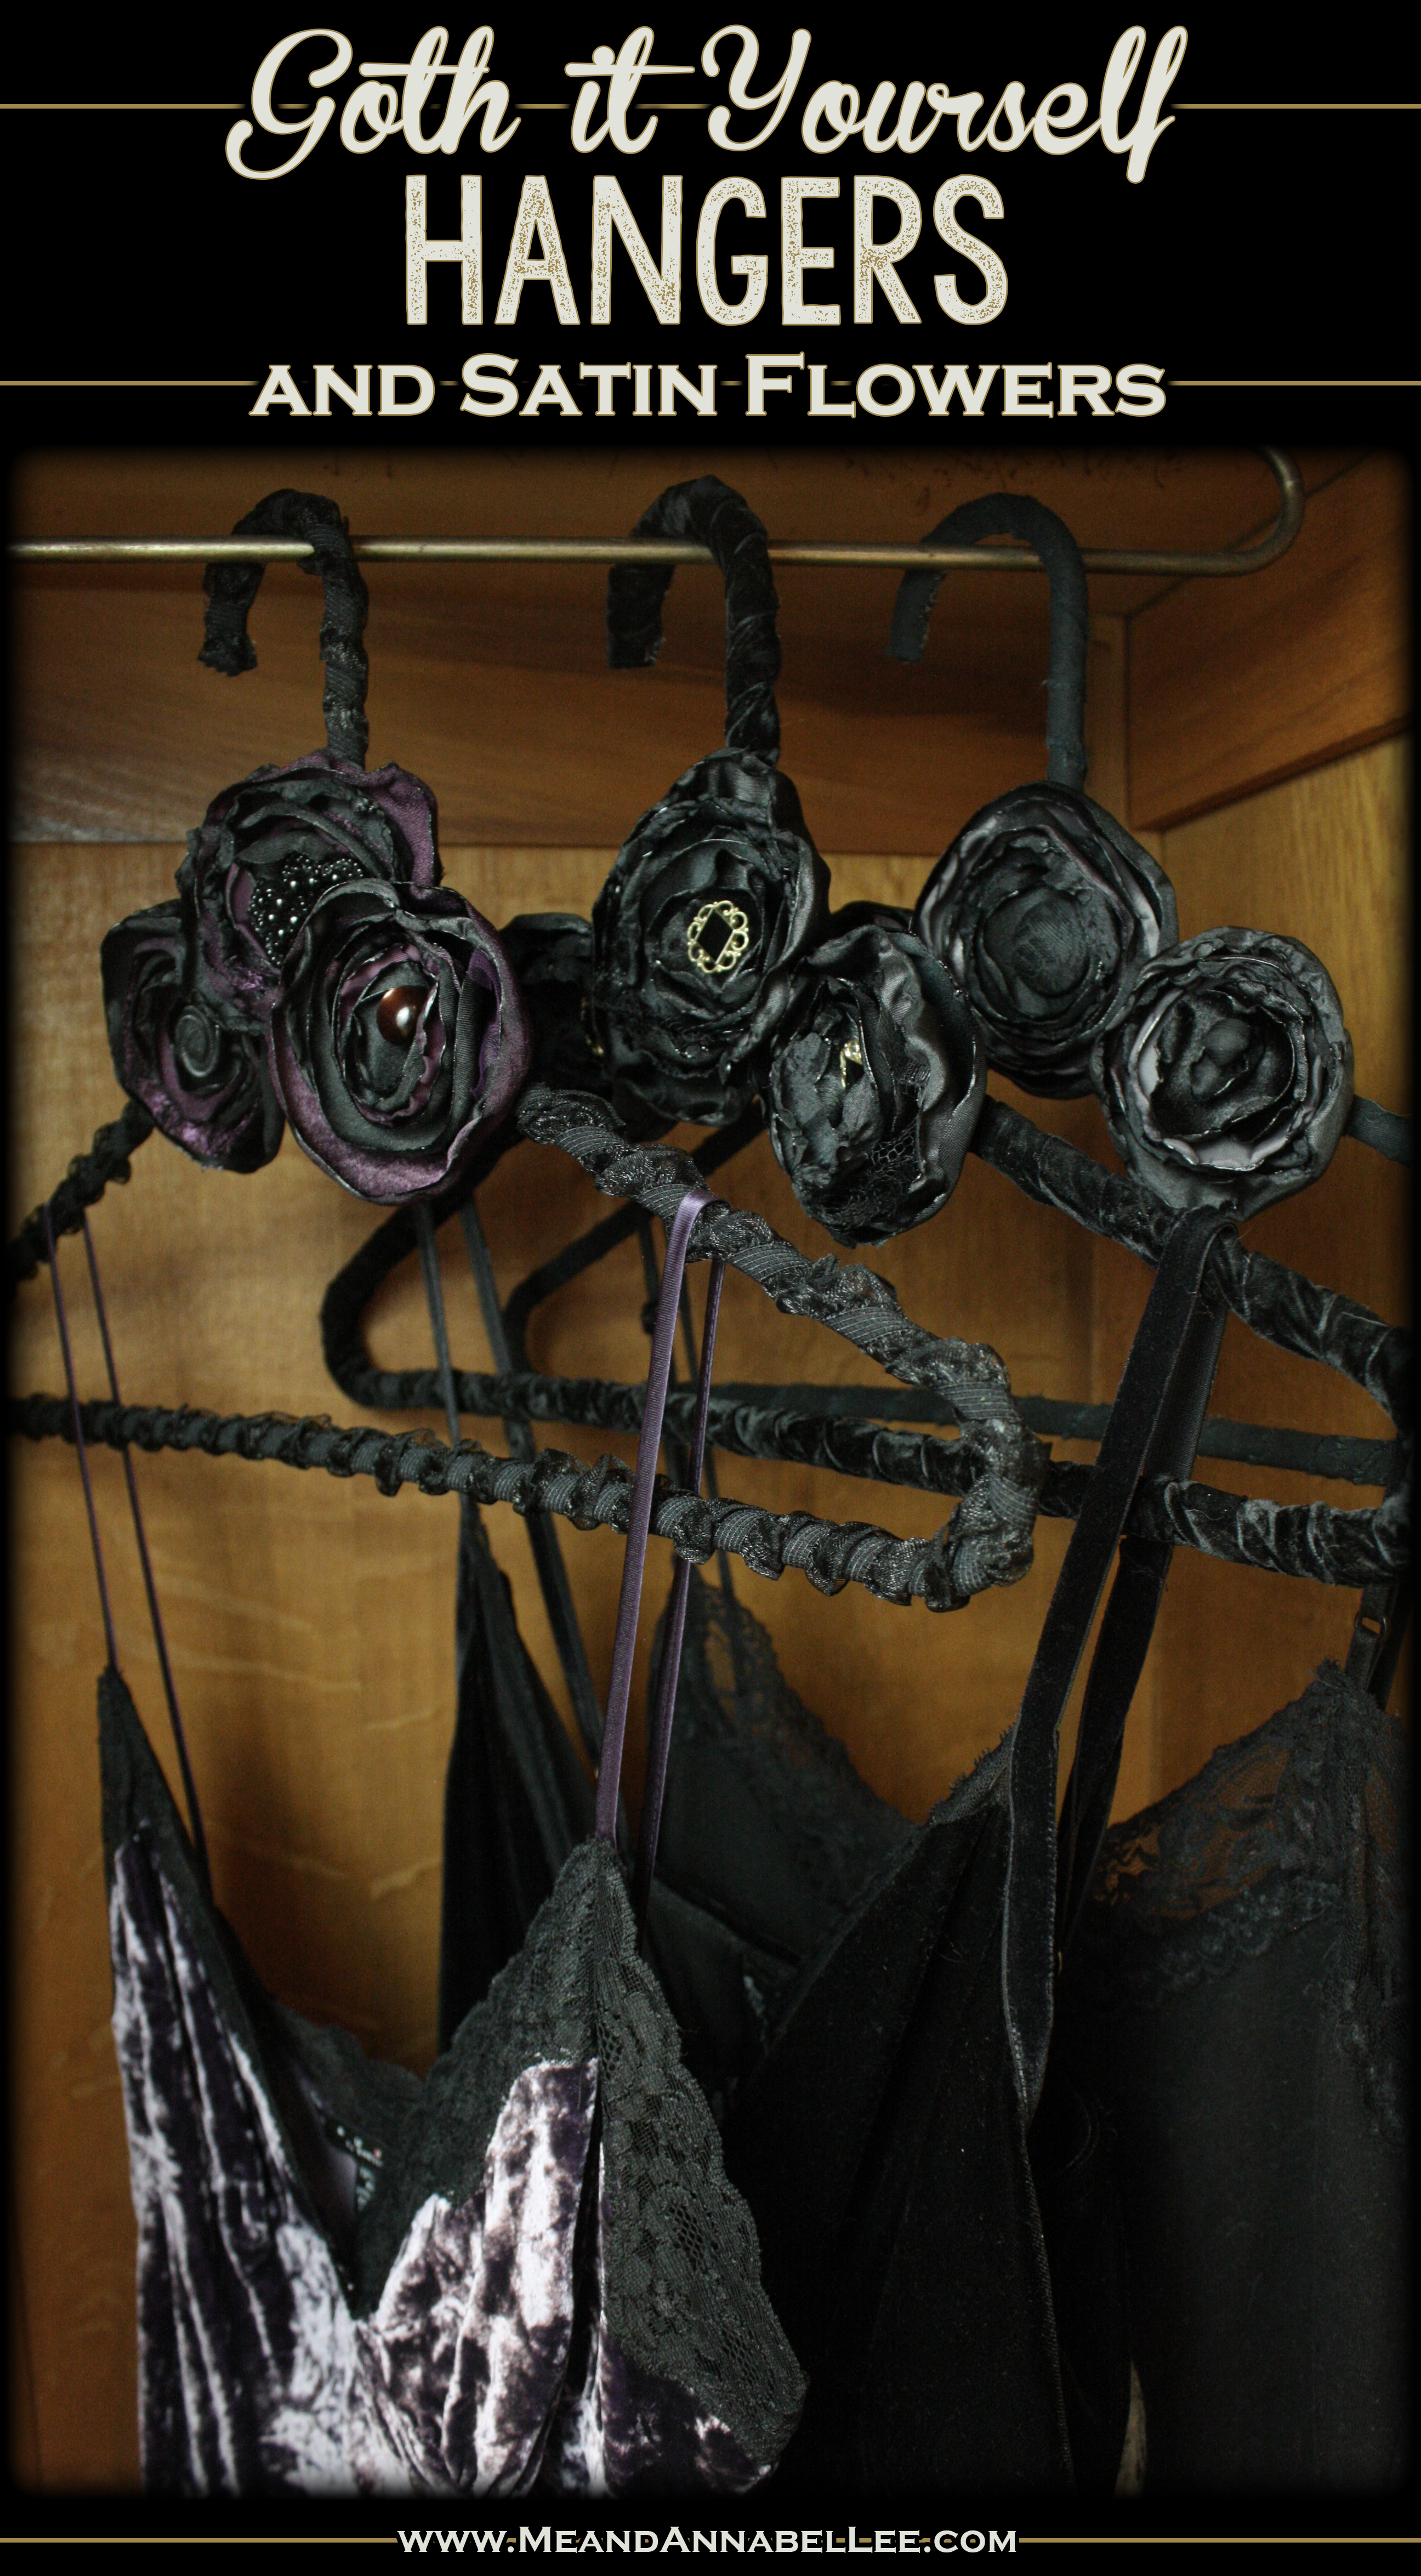 Gothic Fabric Wrapped Hangers with Fabric Flowers | Satin Flower Tutorial | How to add some gothic glamour to your closet | DIY Black Velvet Hangers | Victorian Vintage | Wedding Hangers | Bridesmaids Gifts | Goth Wedding Details | Goth It Yourself | www.MeandAnnabelLee.com